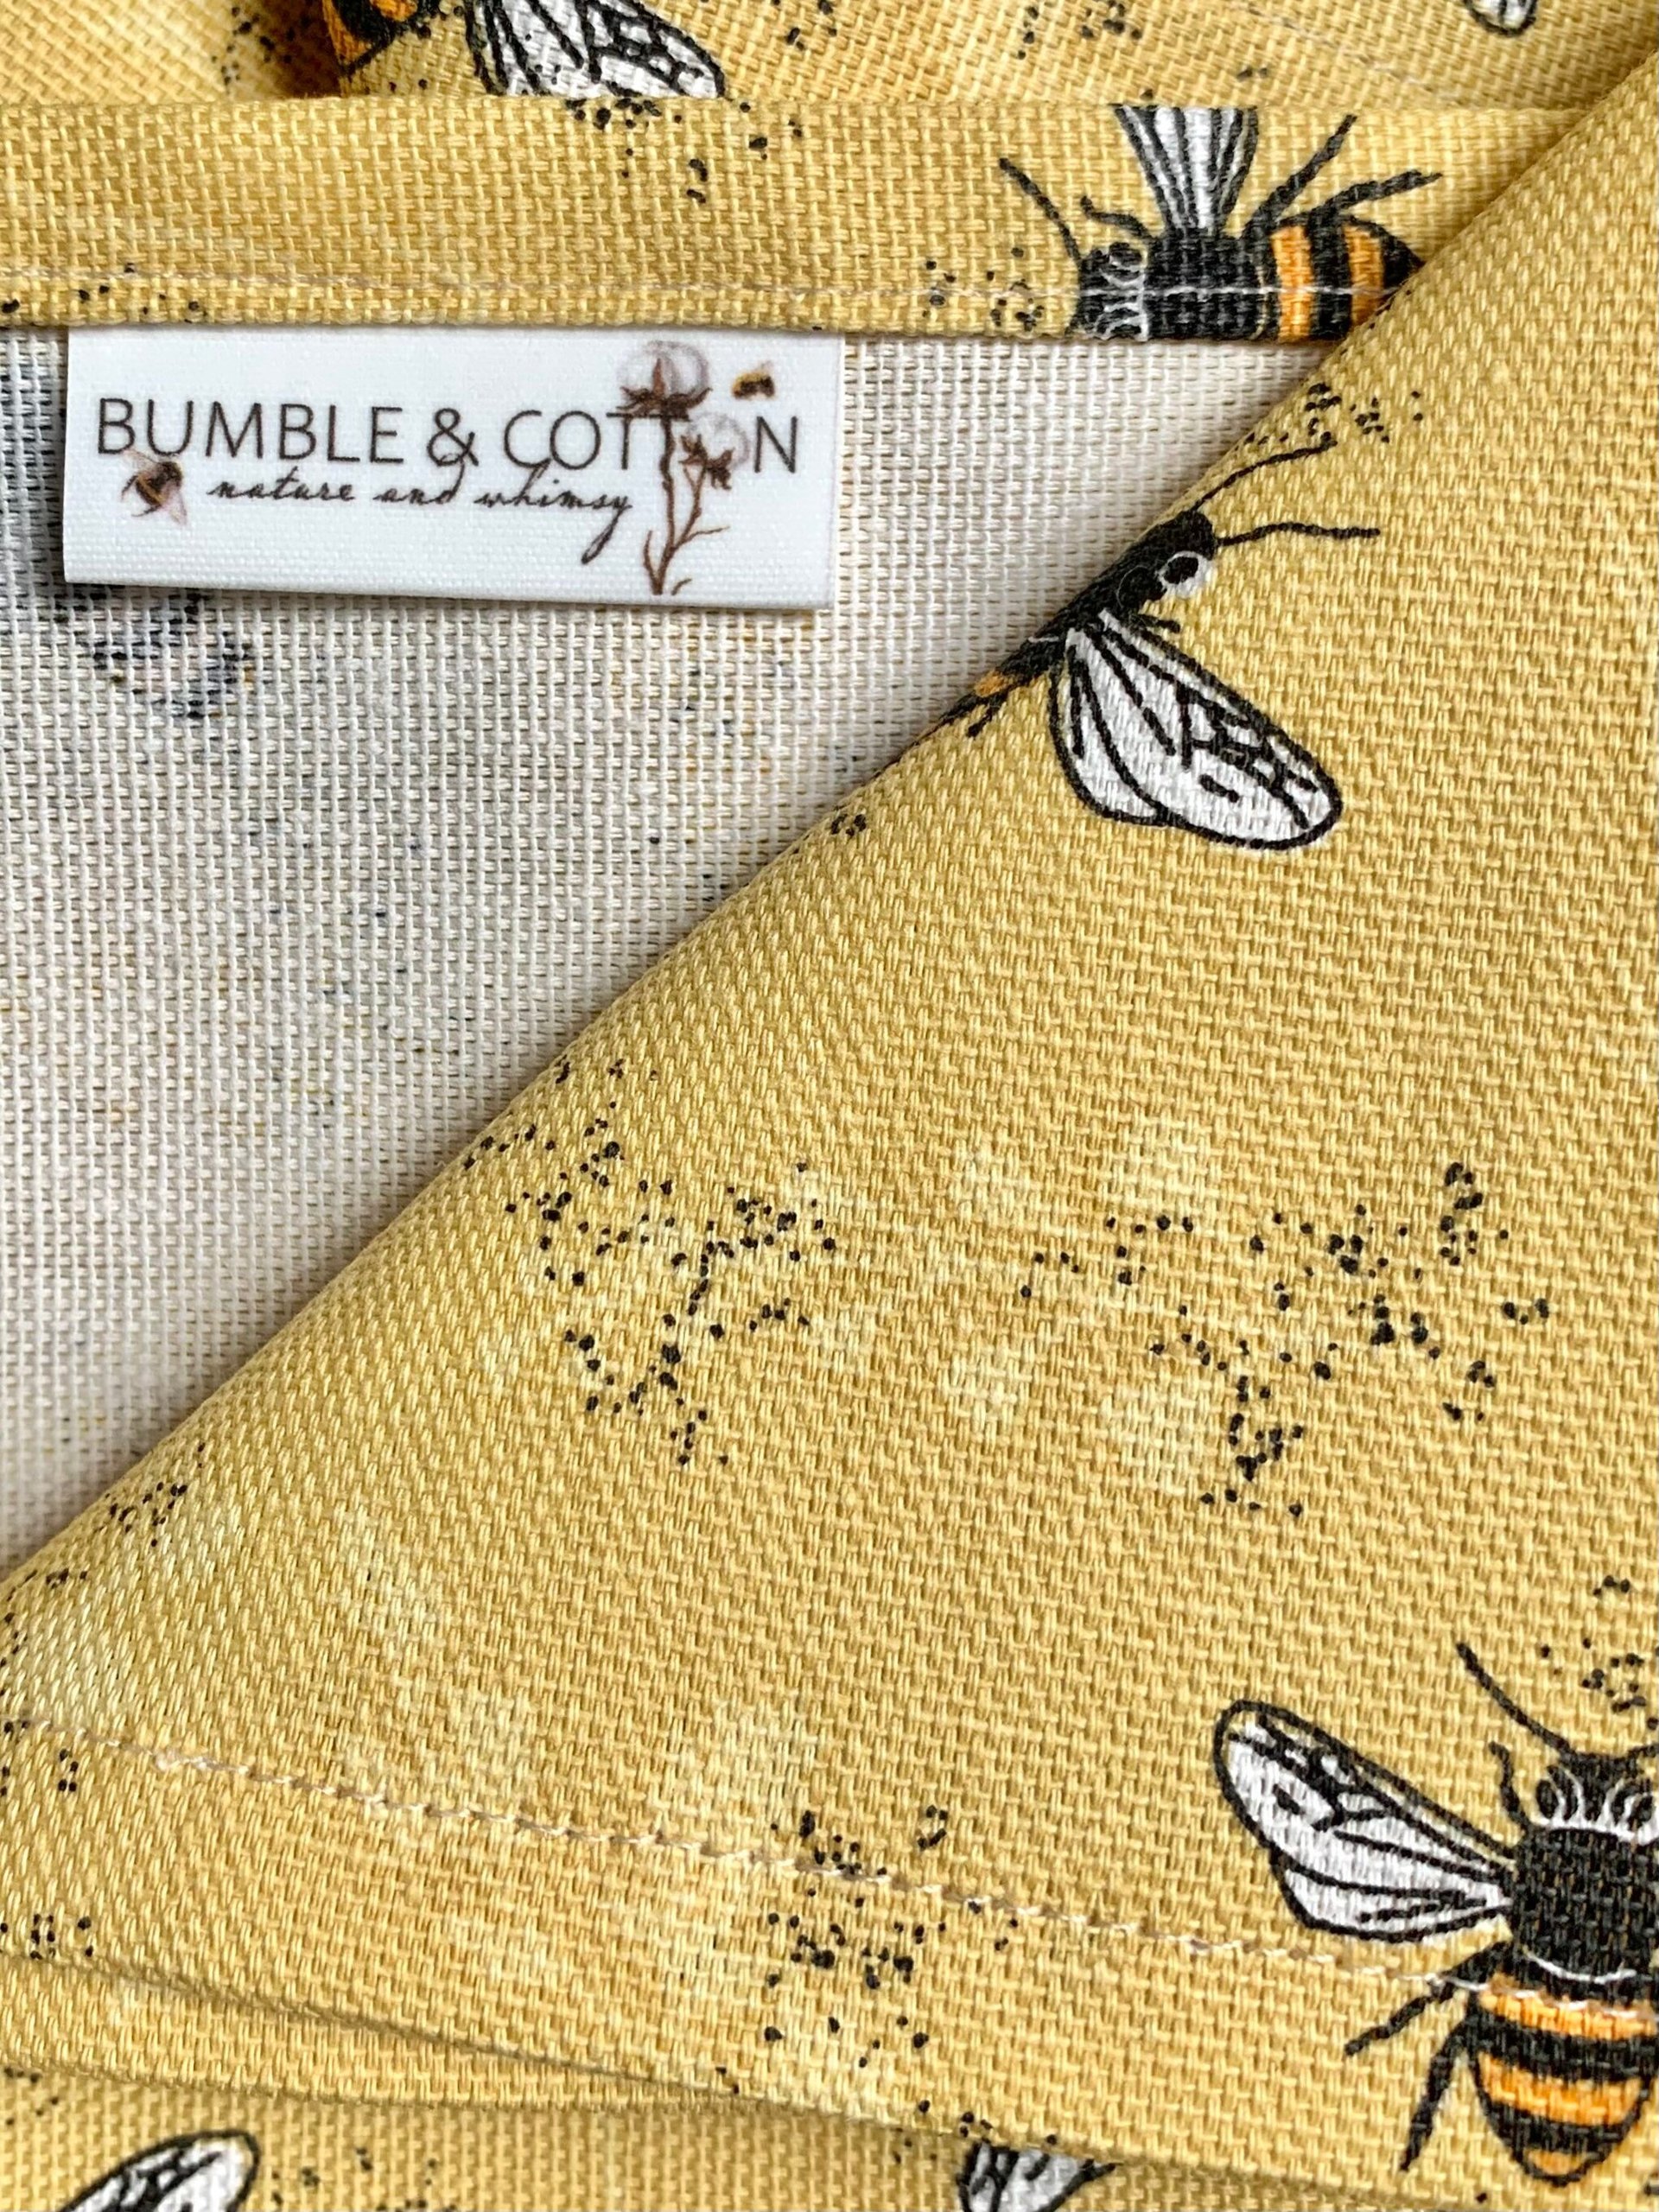 Bee's on Yellow Chef Towel || Nature Inspired Kitchen Towel